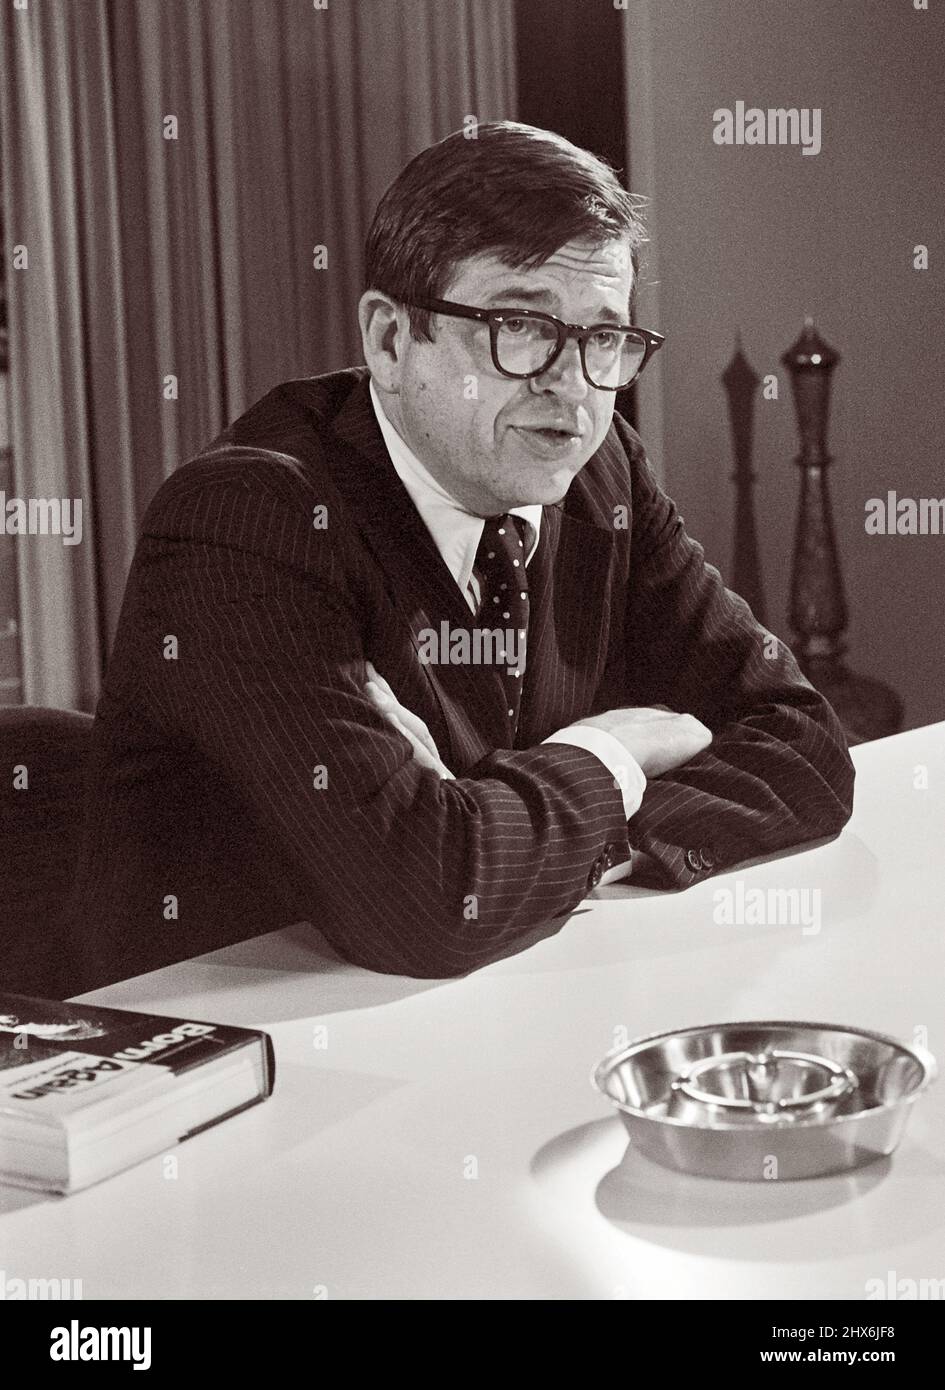 Charles 'Chuck' Colson (1931-2012) speaking at a press conference on June 13, 1976, at Amsterdam Airport Schiphol upon the publication of his autobiographical book, Born Again. Colson, a former political advisor to U.S. President Richard Nixon, was sentenced to prison for his role in the Watergate scandal. Before entering prison, Colson became an evangelical Christian and in 1976 founded Prison Fellowship, a Christian nonprofit ministry to prisoners. Stock Photo